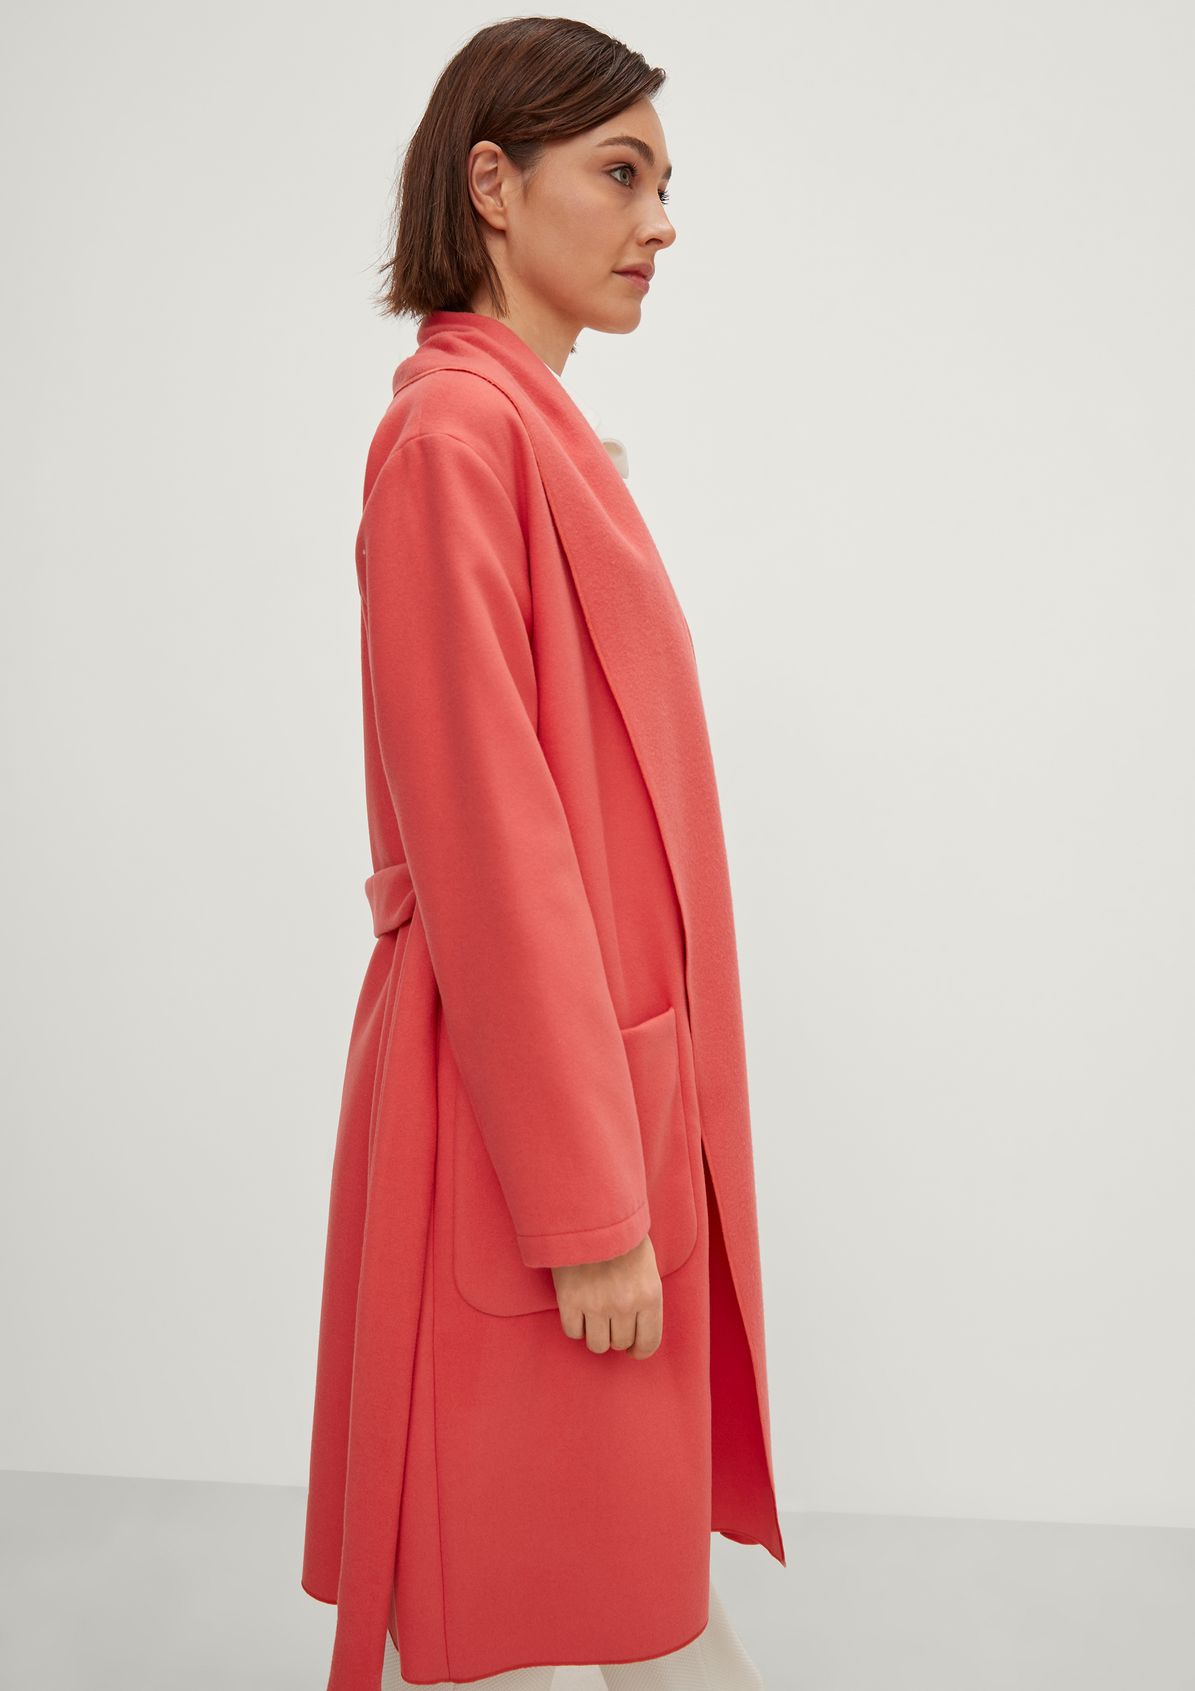 Viscose blend coat from comma